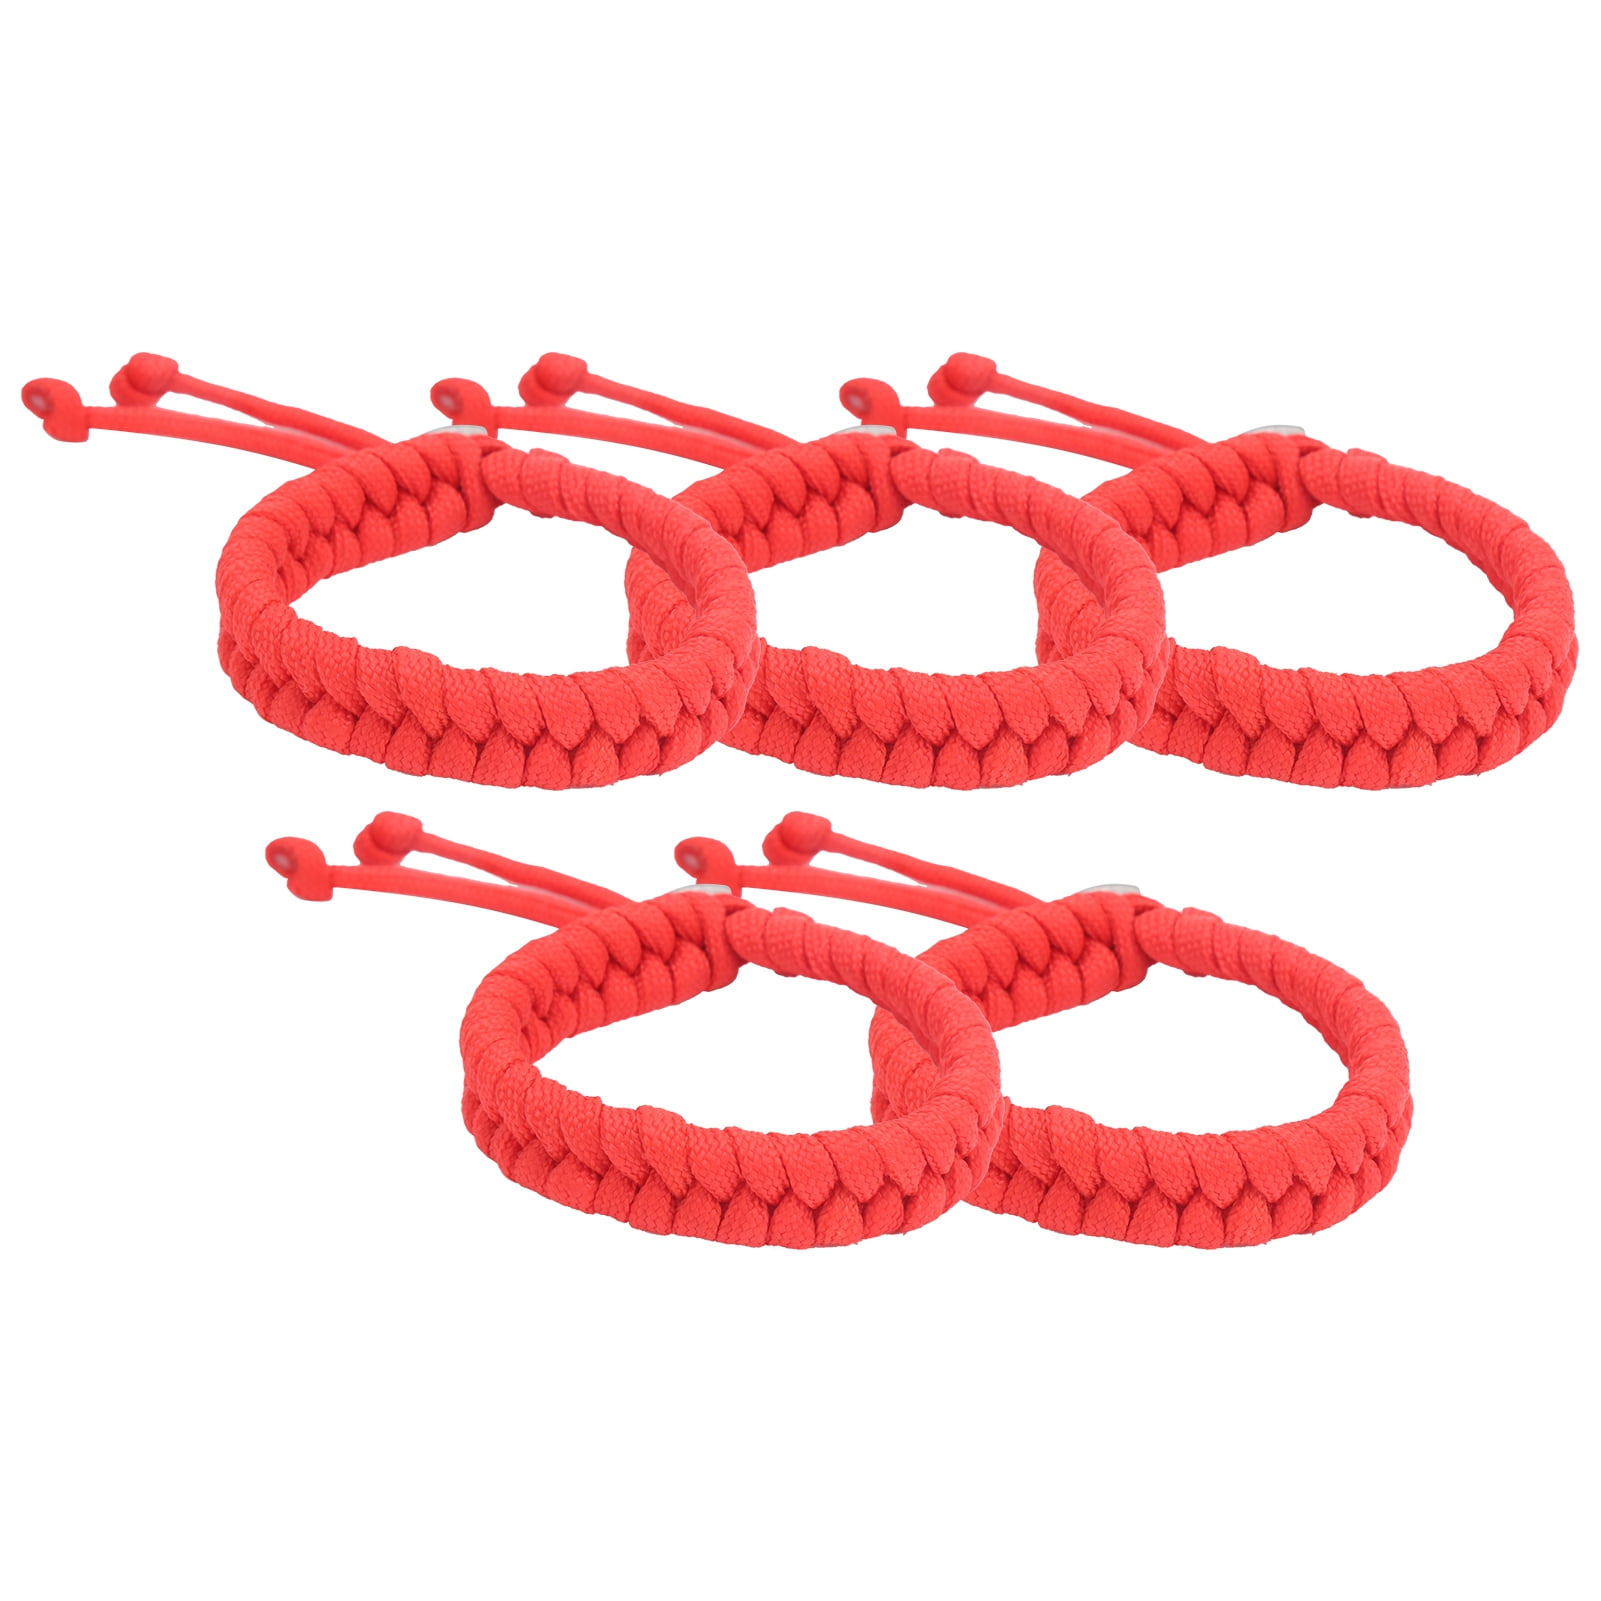 Paracord Rope Emergency Tool Survival Bracelet with Adjustable D Shackle  Ci18271  China Hook and Hand Tools price  MadeinChinacom